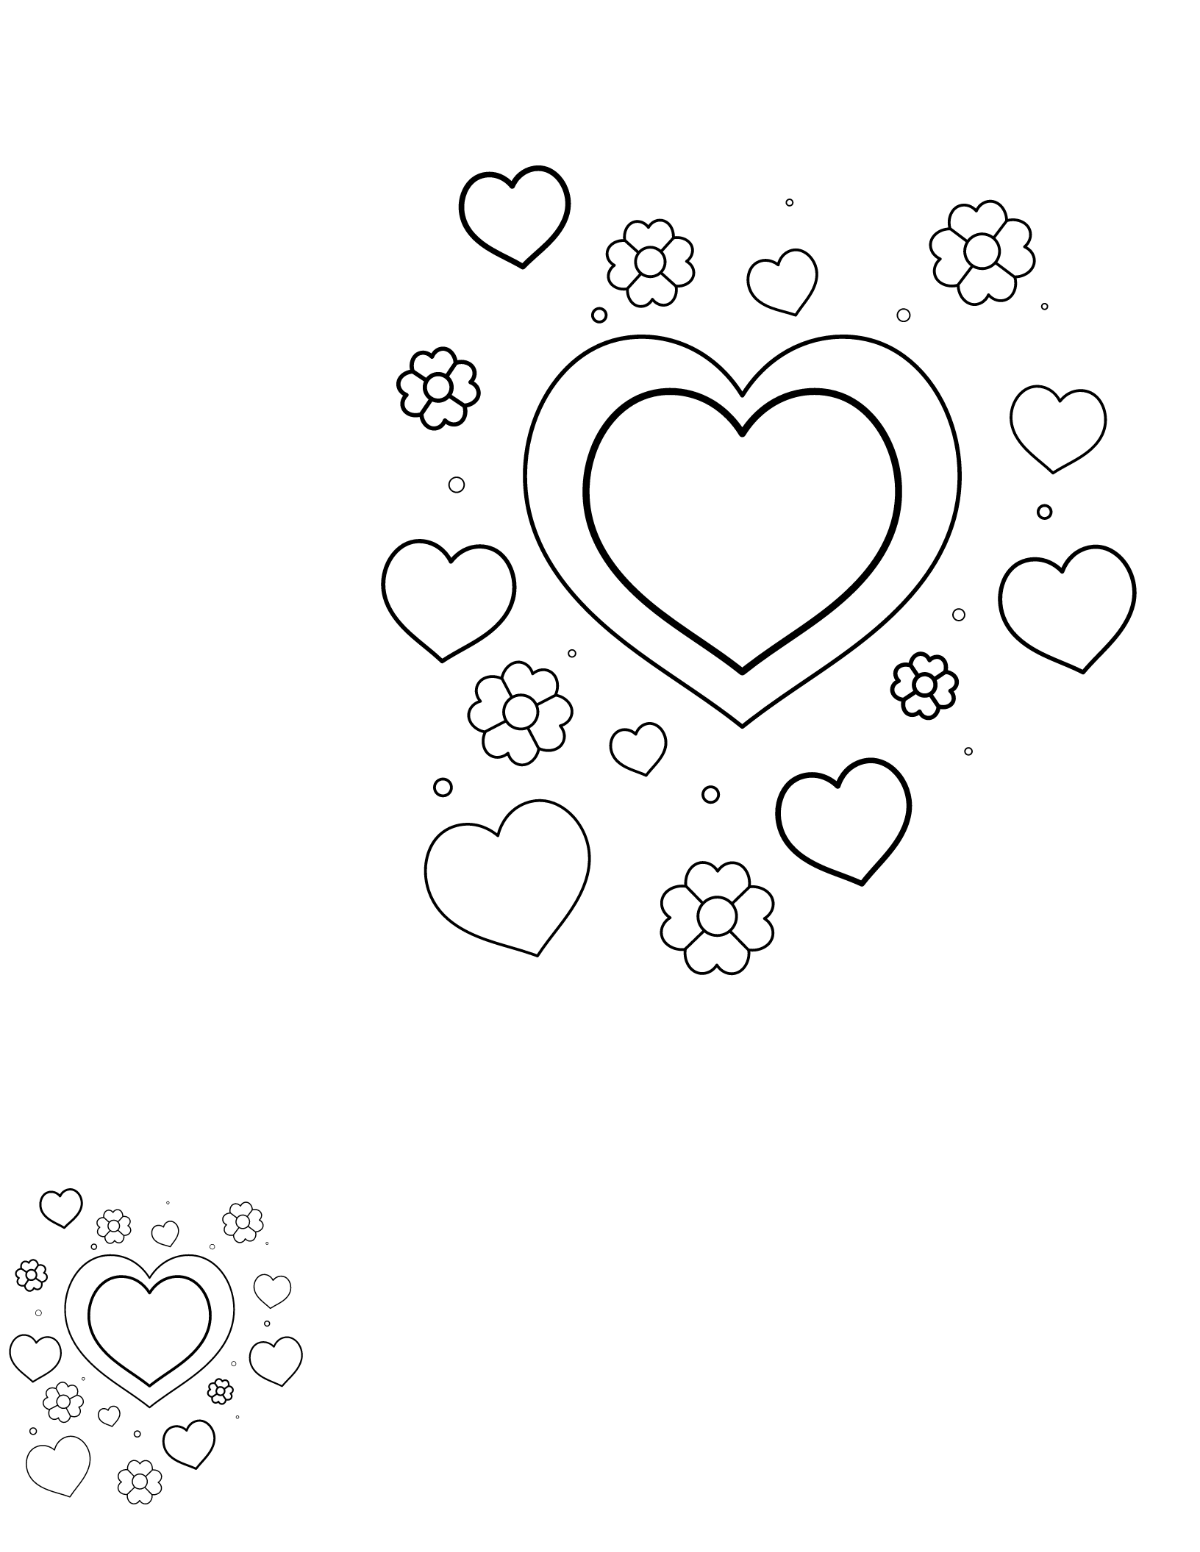 Hearts and Flowers Coloring Page for Kids Template